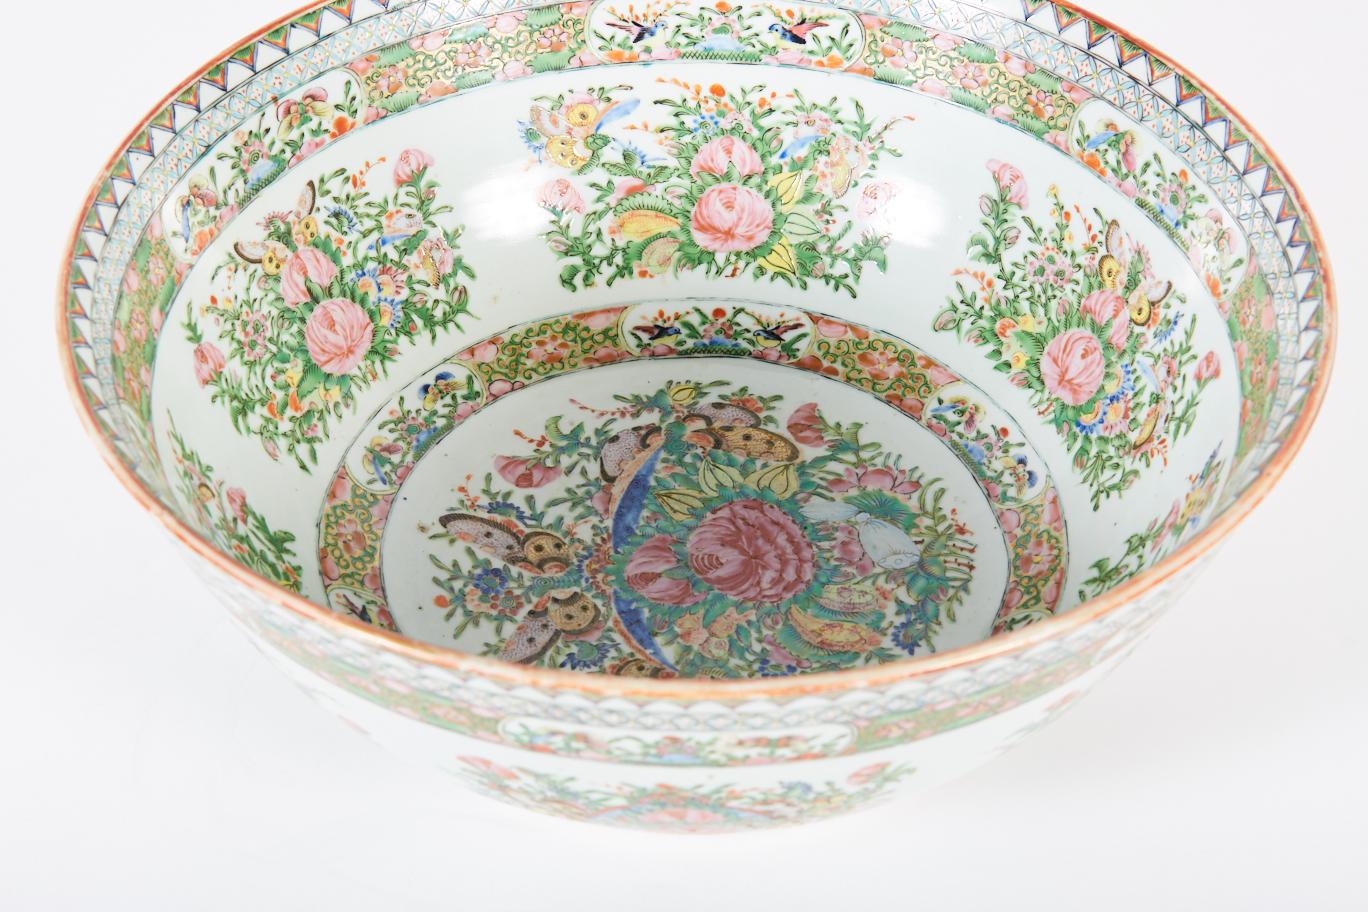 Large late 19th century Chinese export rose medallion punch bowl.